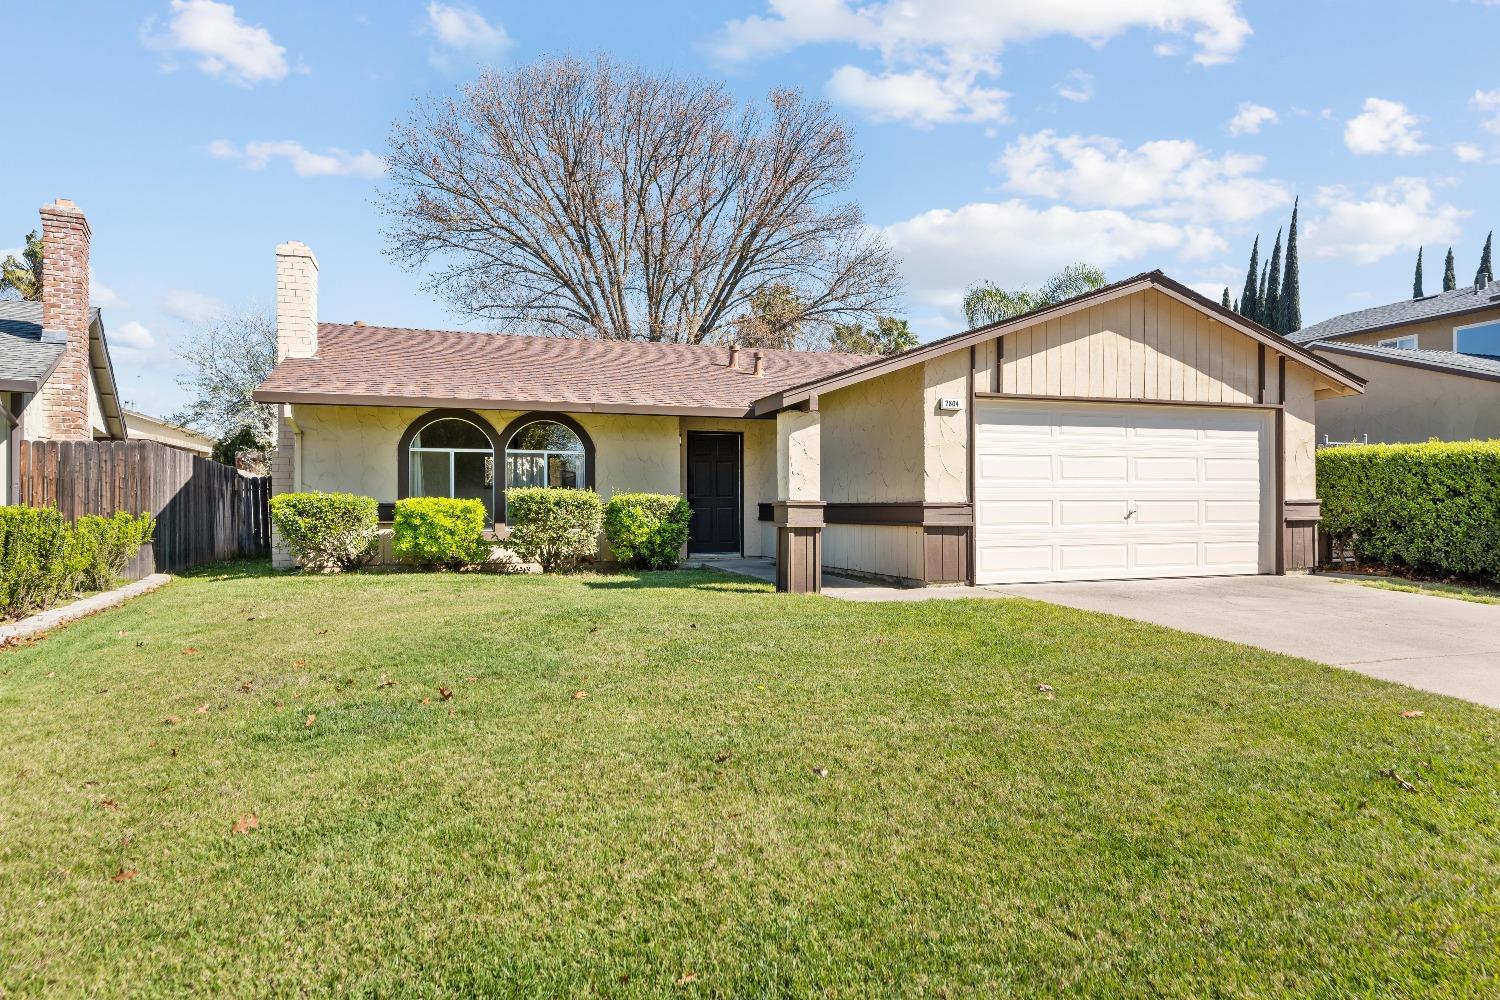 Photo of 7804 Smoley Wy in Citrus Heights, CA